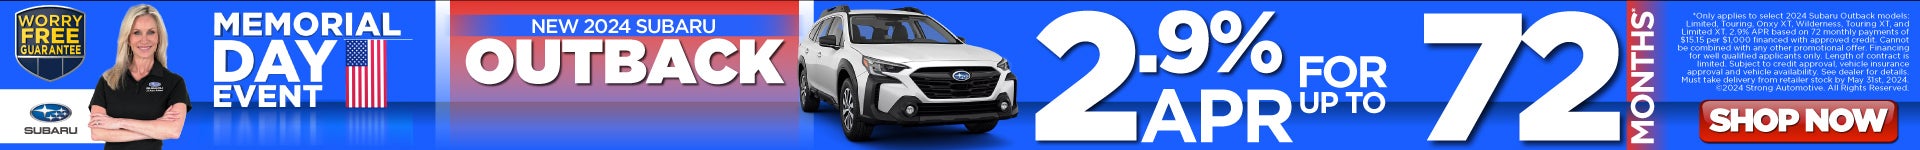 New 2024 Subaru Outback | 2.9% APR for up to 72 months*